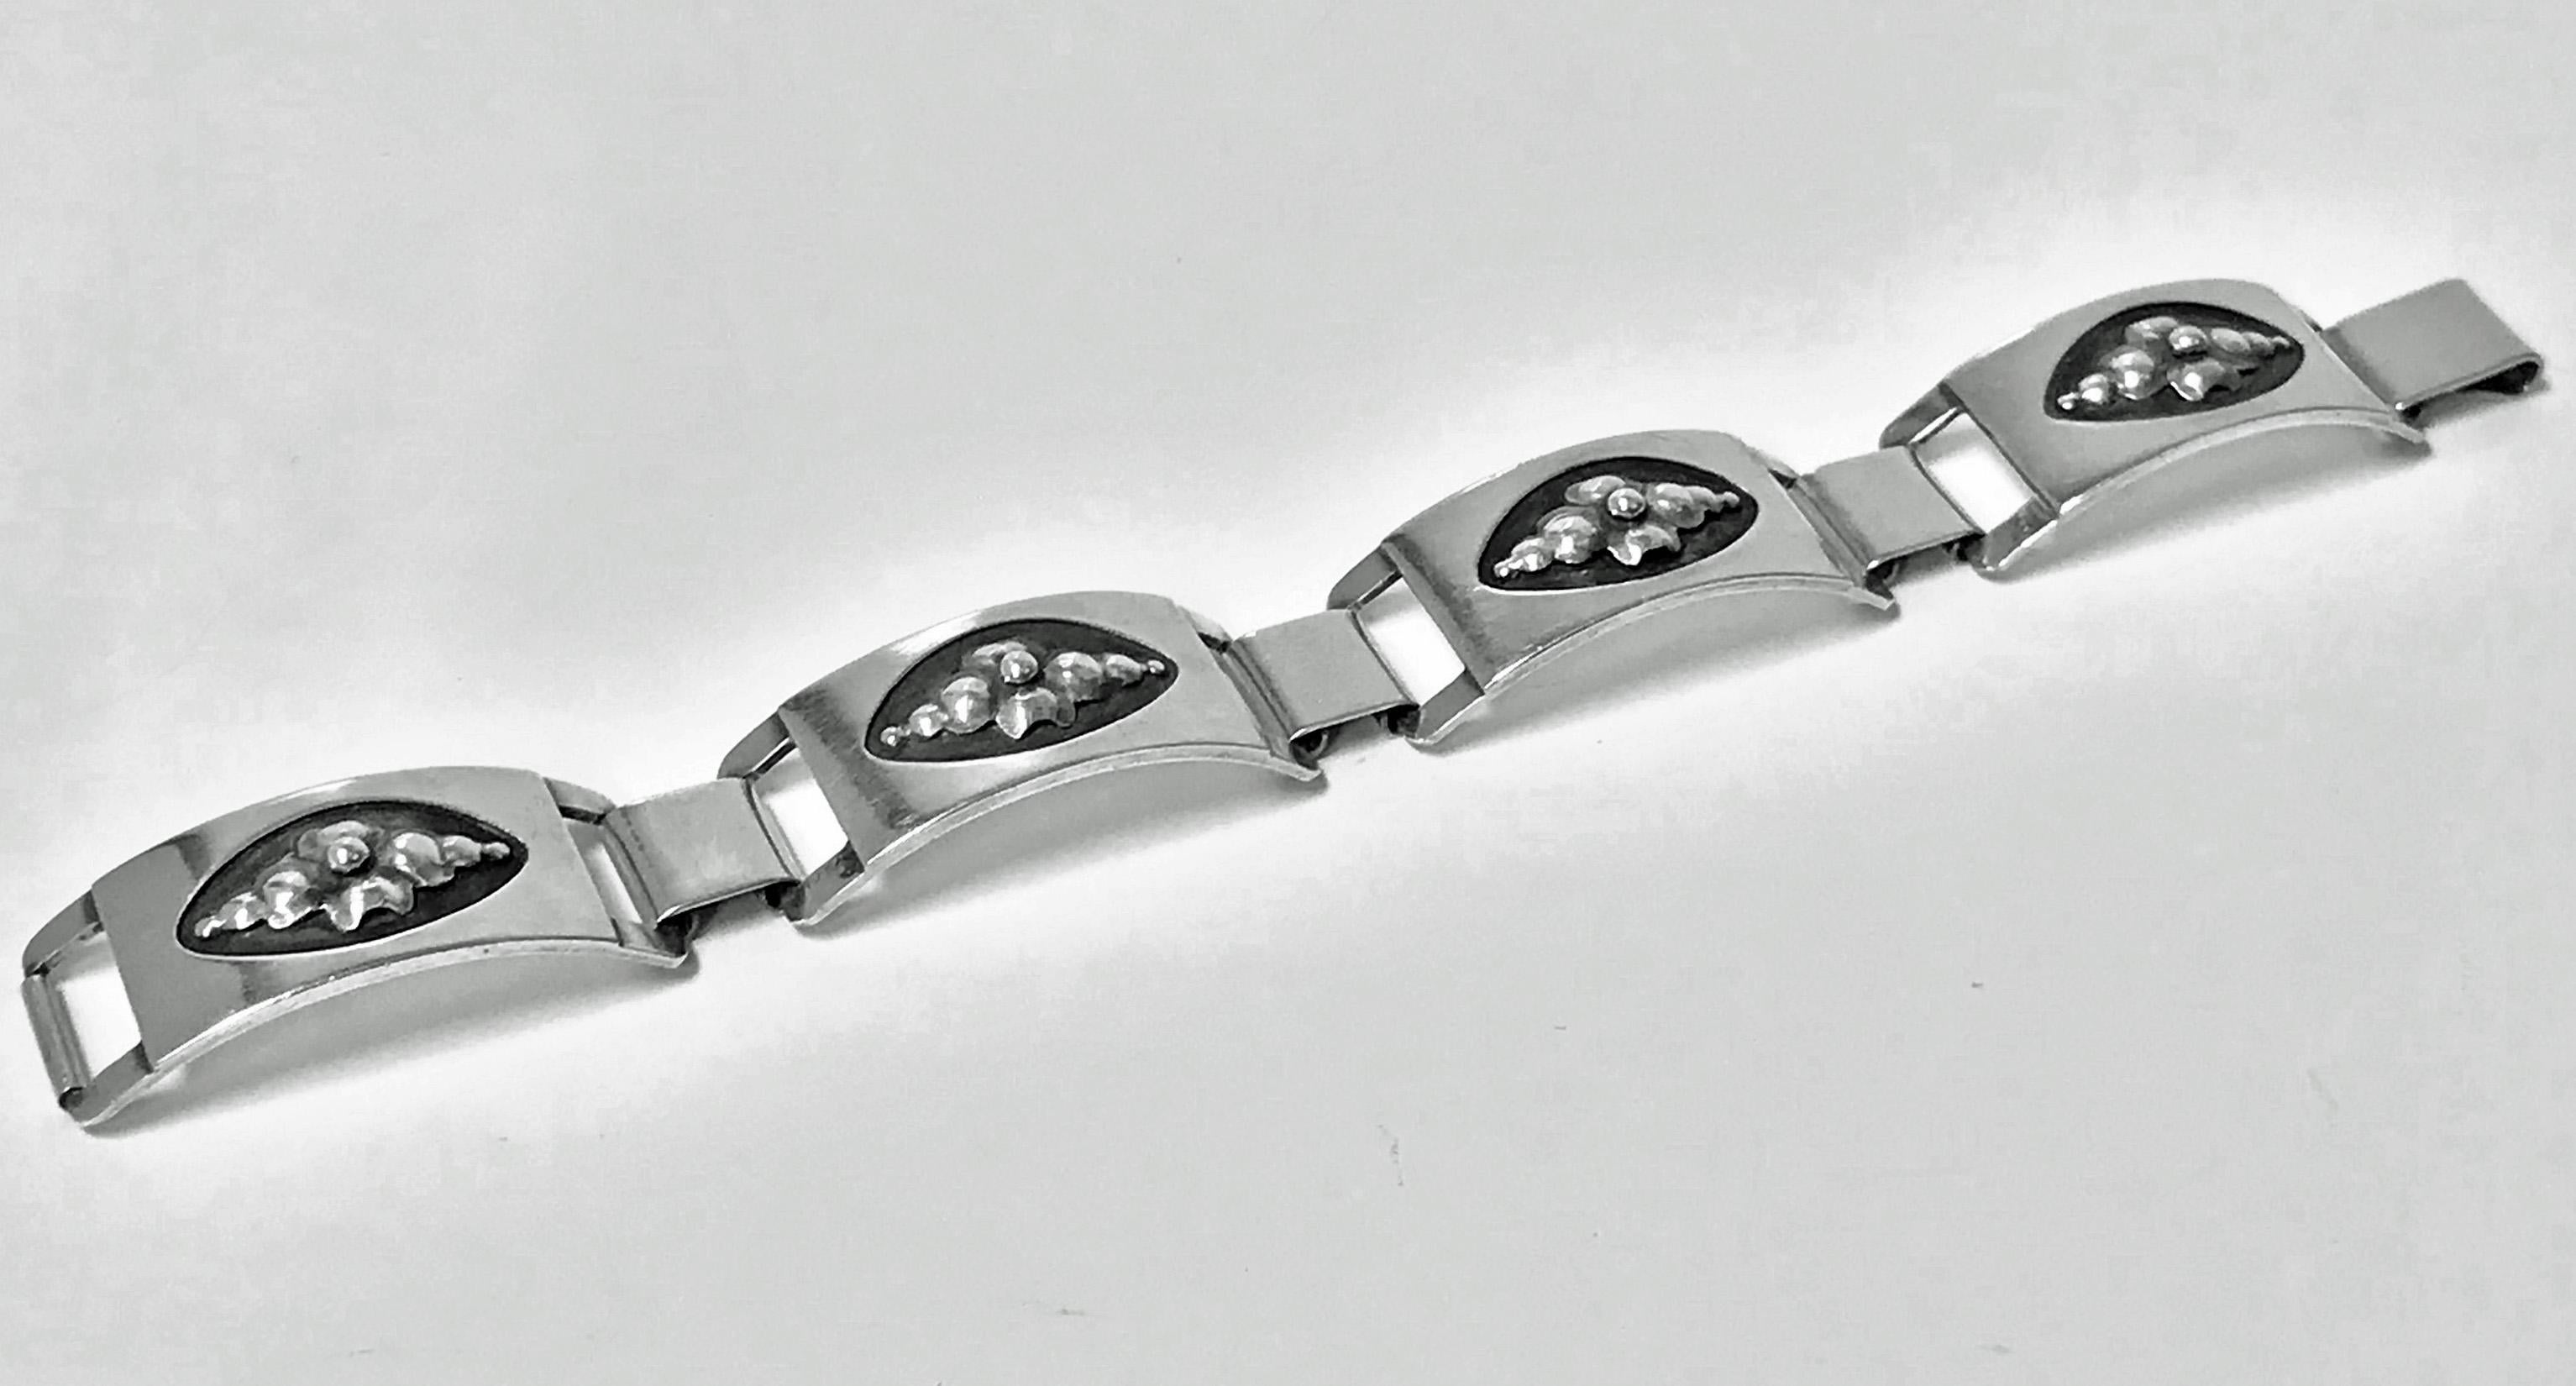 Georg Jensen Sterling Bracelet, C.1944.The design bright flowers applied on an oxidised background, plain polished silver and inter spaced links surround. Georg Jensen Sterling USA marks to reverse and design number 407. Illustrated page 54 Jensen